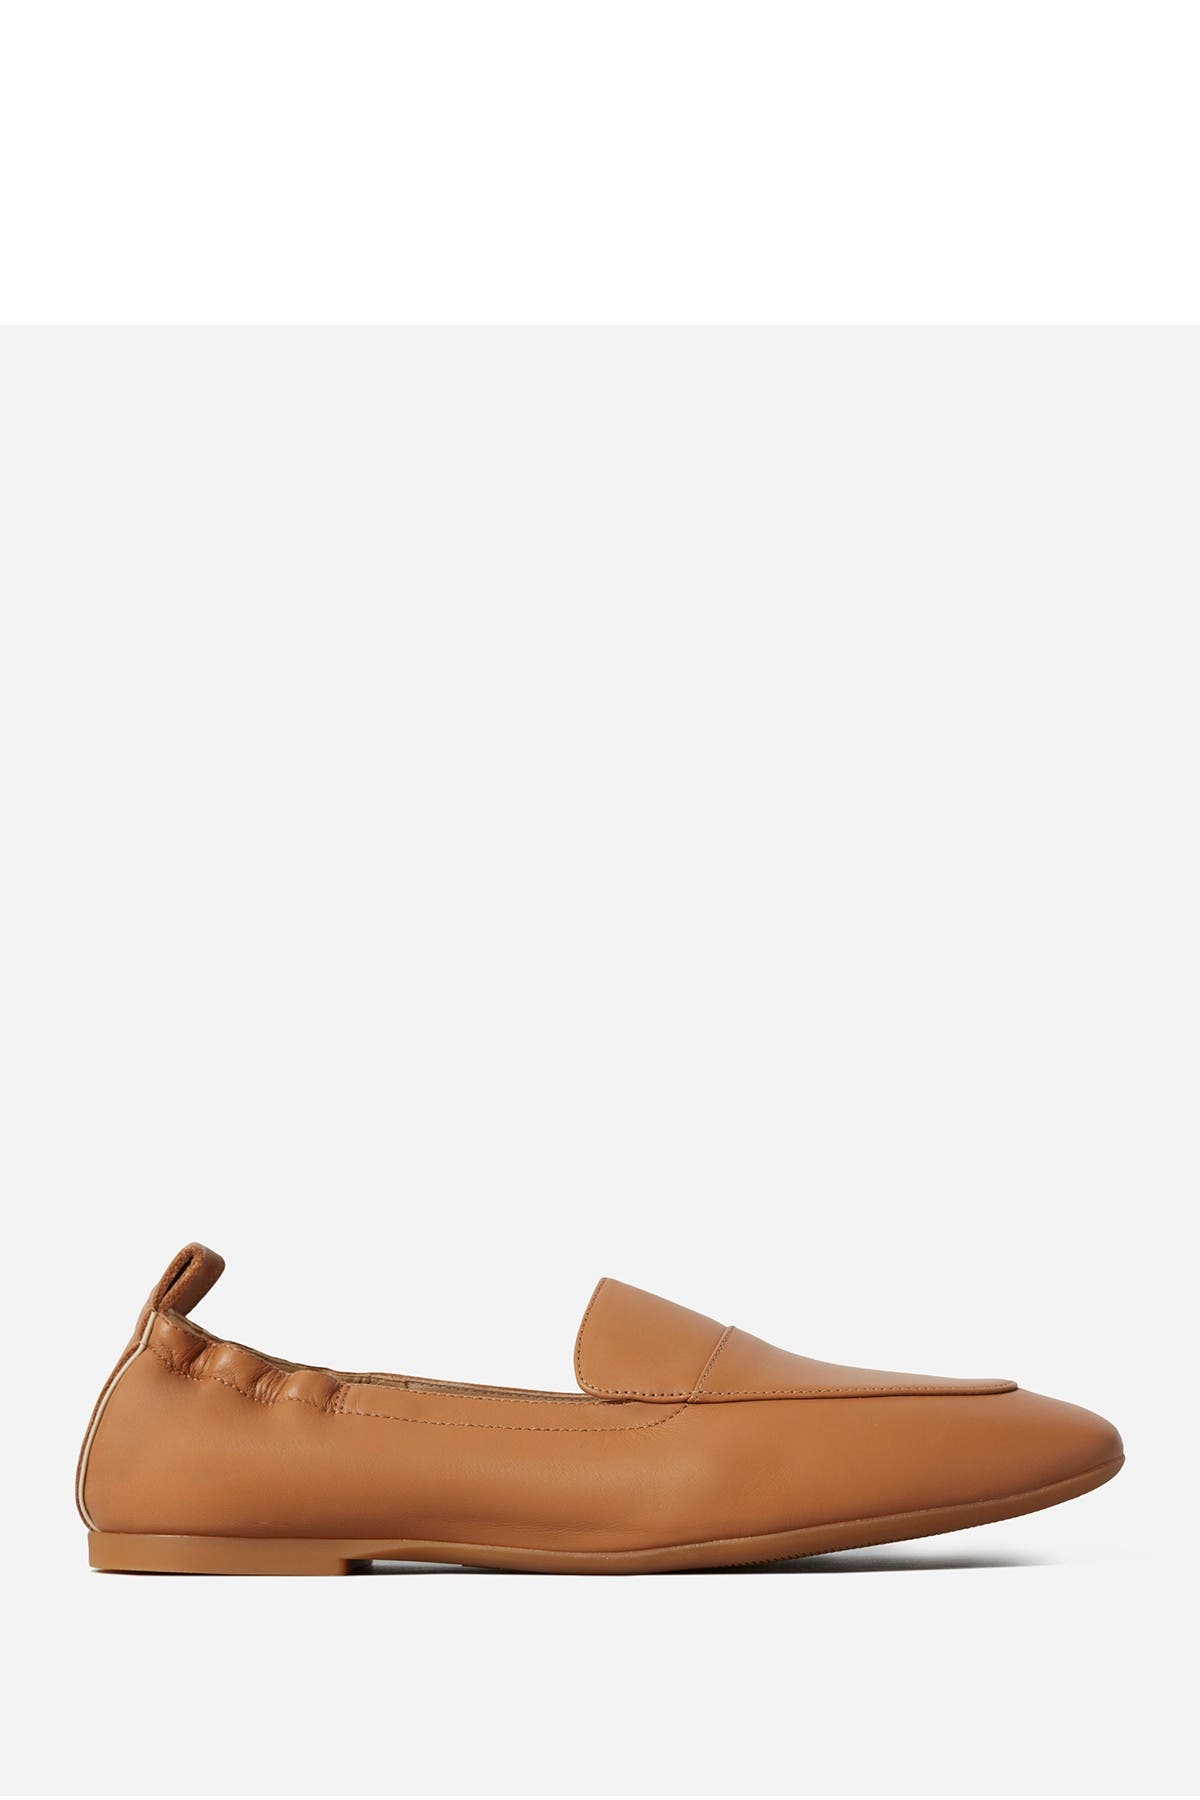 rack room shoes loafers